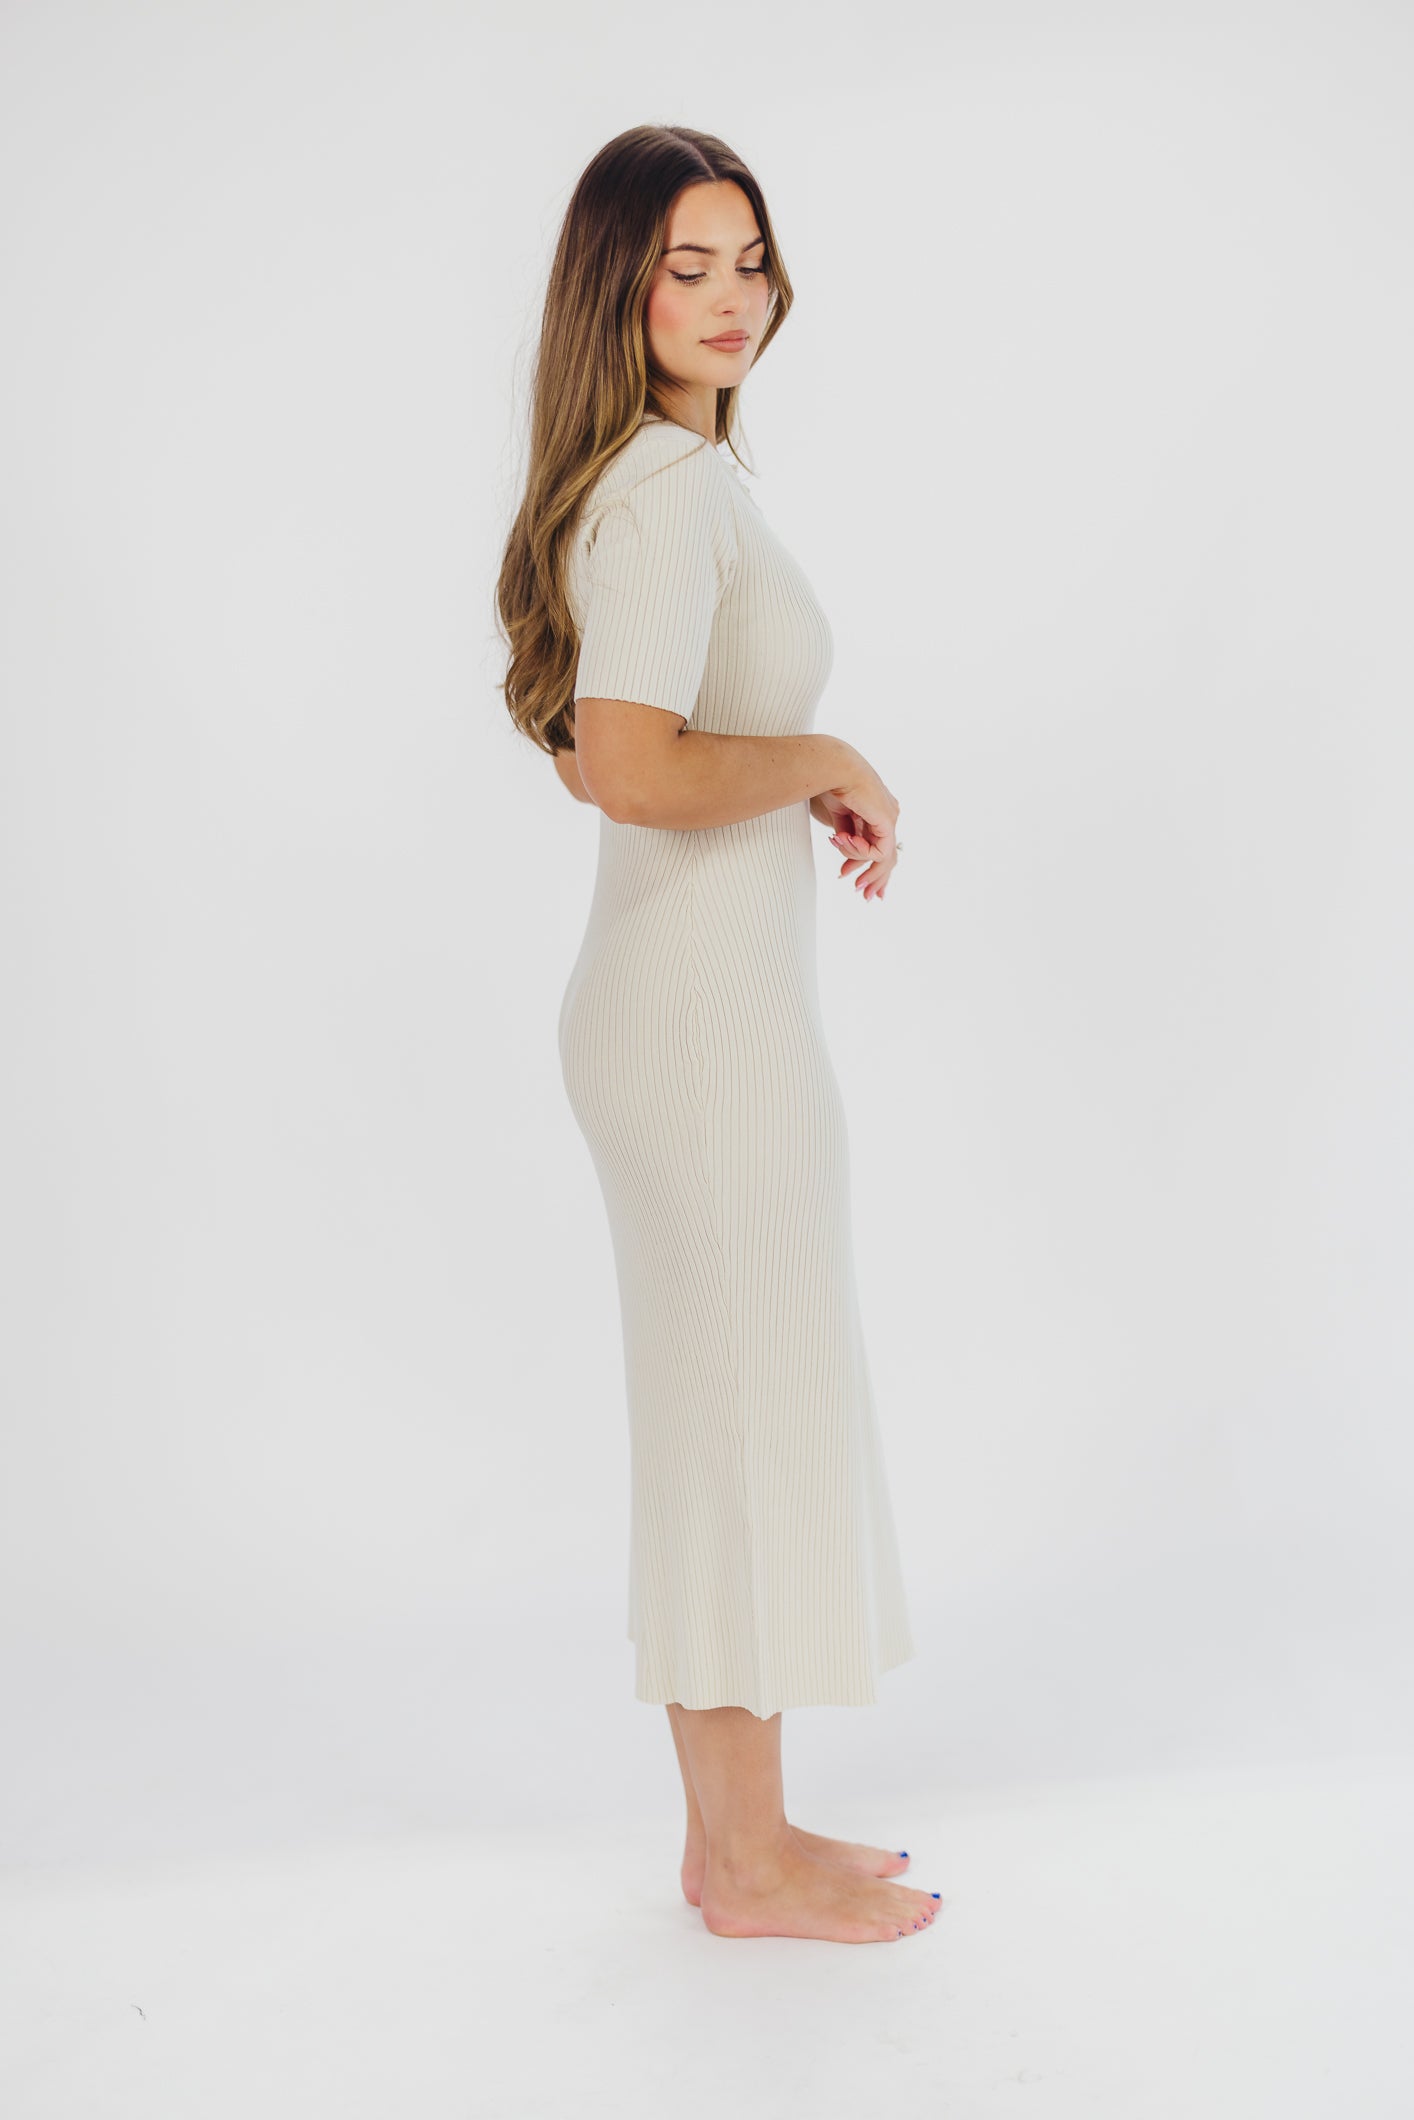 Samantha Button Front Maxi Dress in Ivory